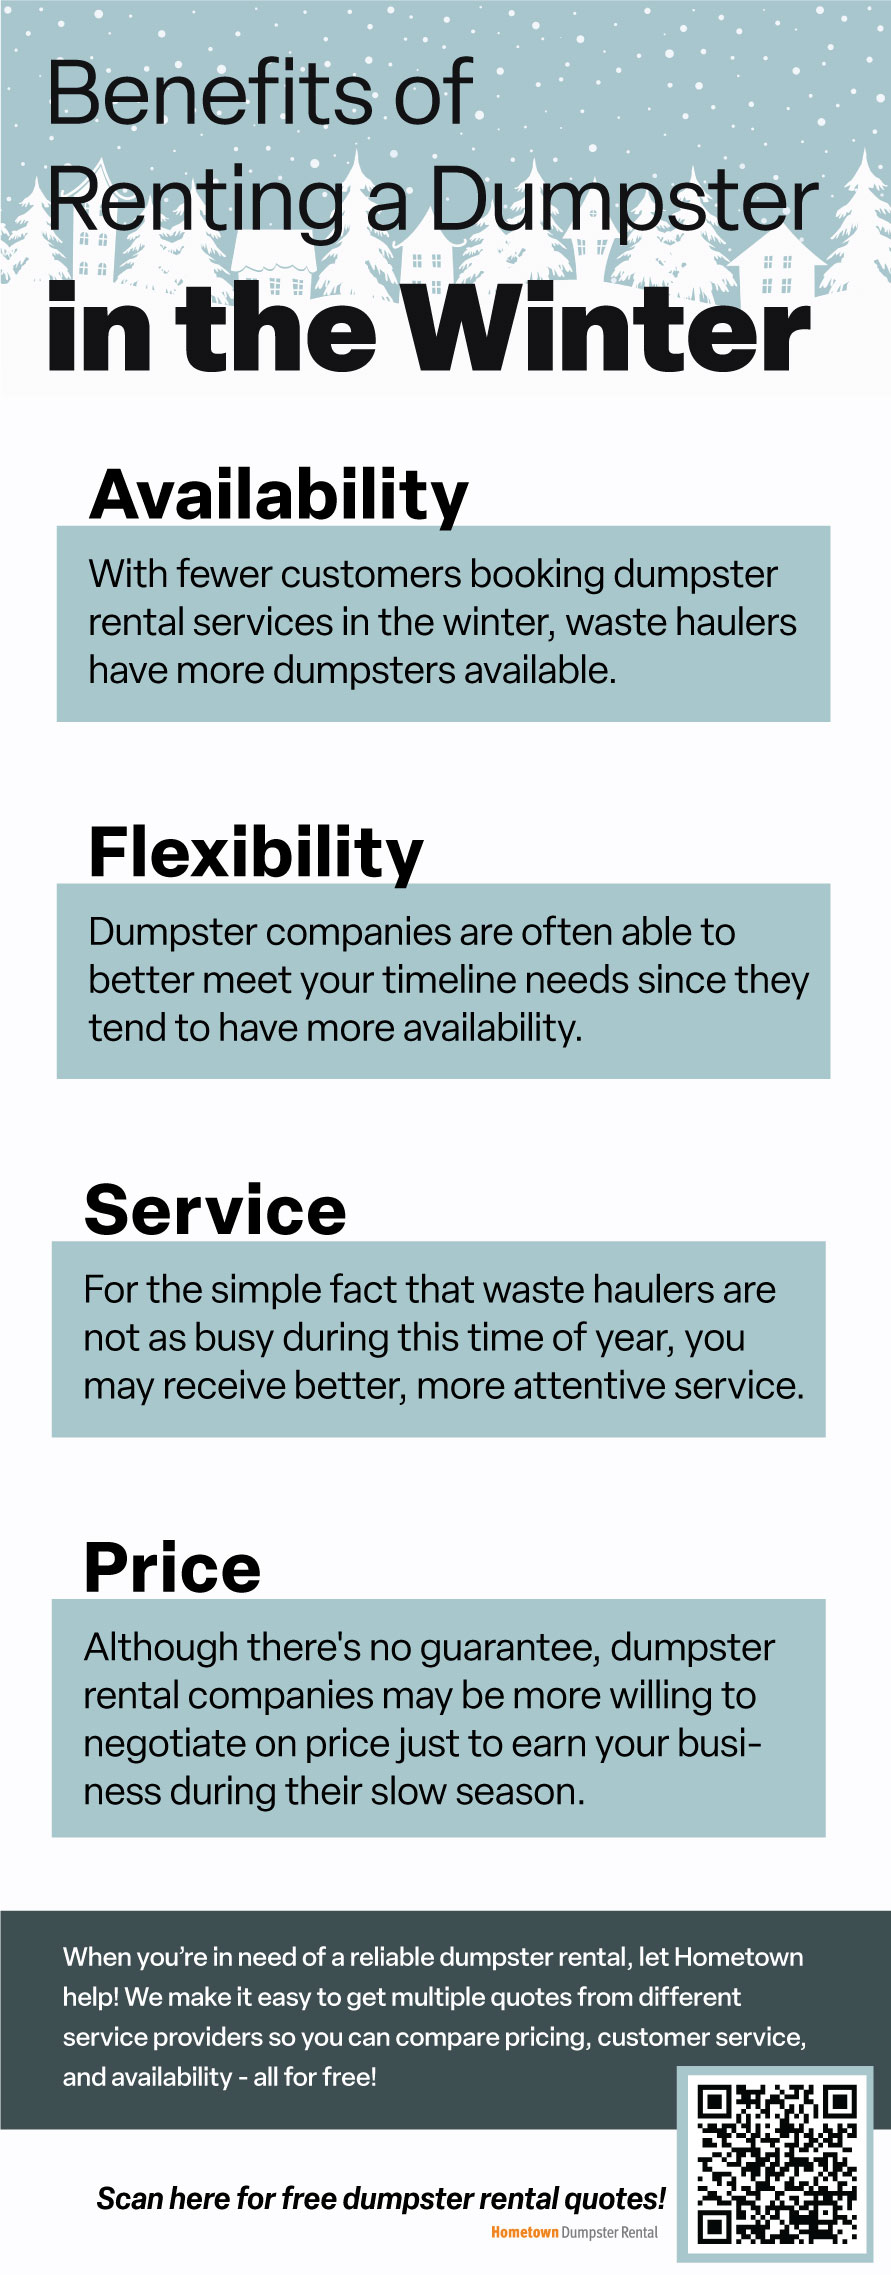 Benefits of Renting a Dumpster in the Winter Infographic